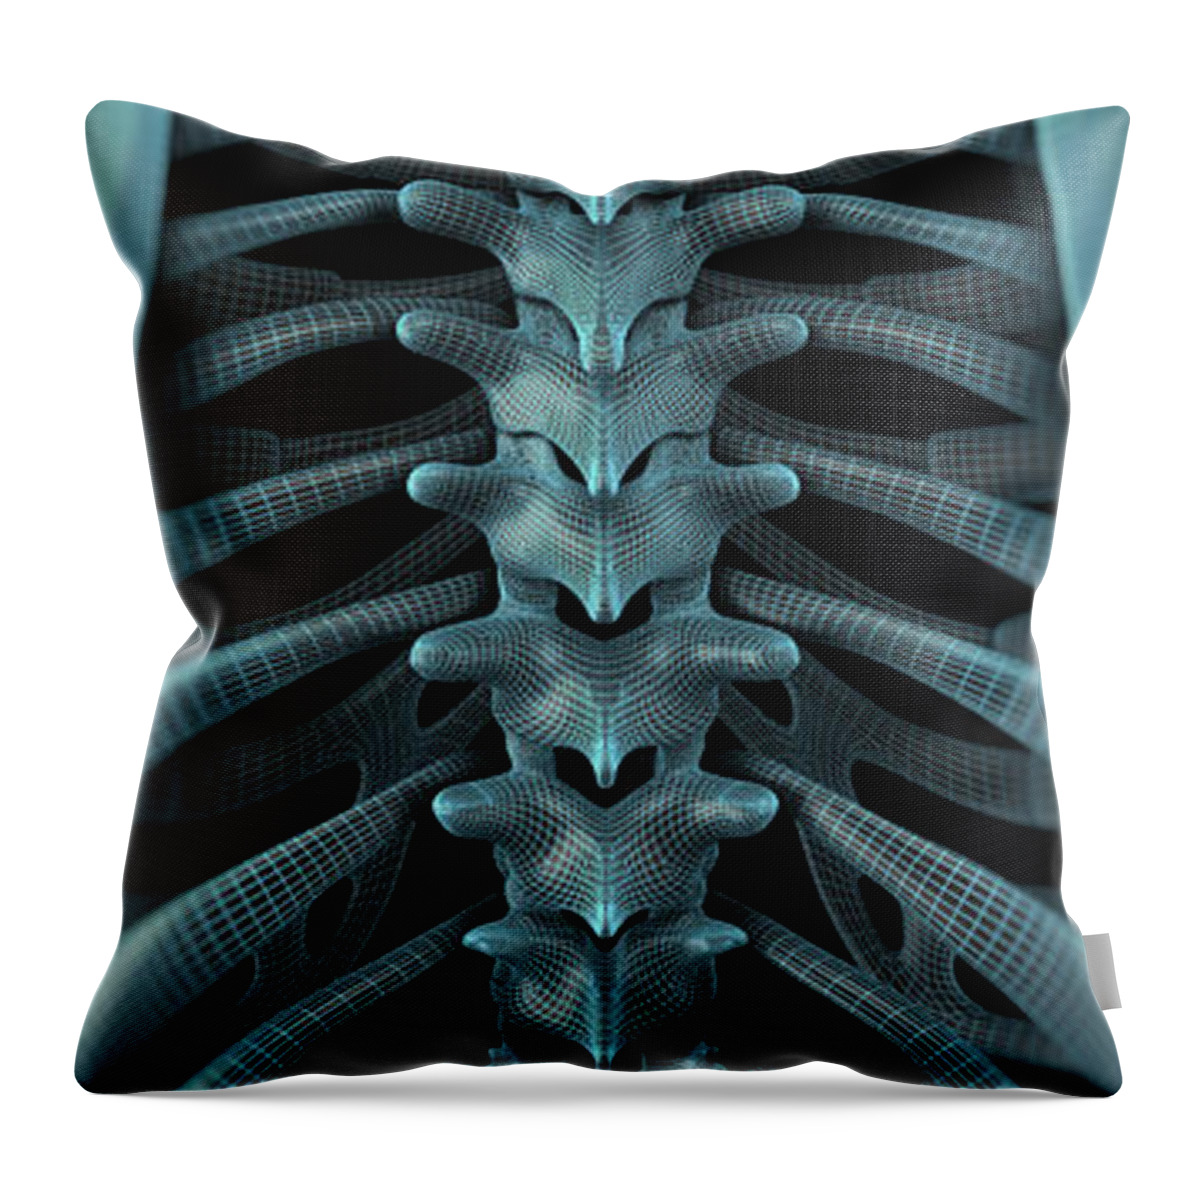 Biomedical Illustration Throw Pillow featuring the photograph The Vertebral Column Wireframe by Science Picture Co